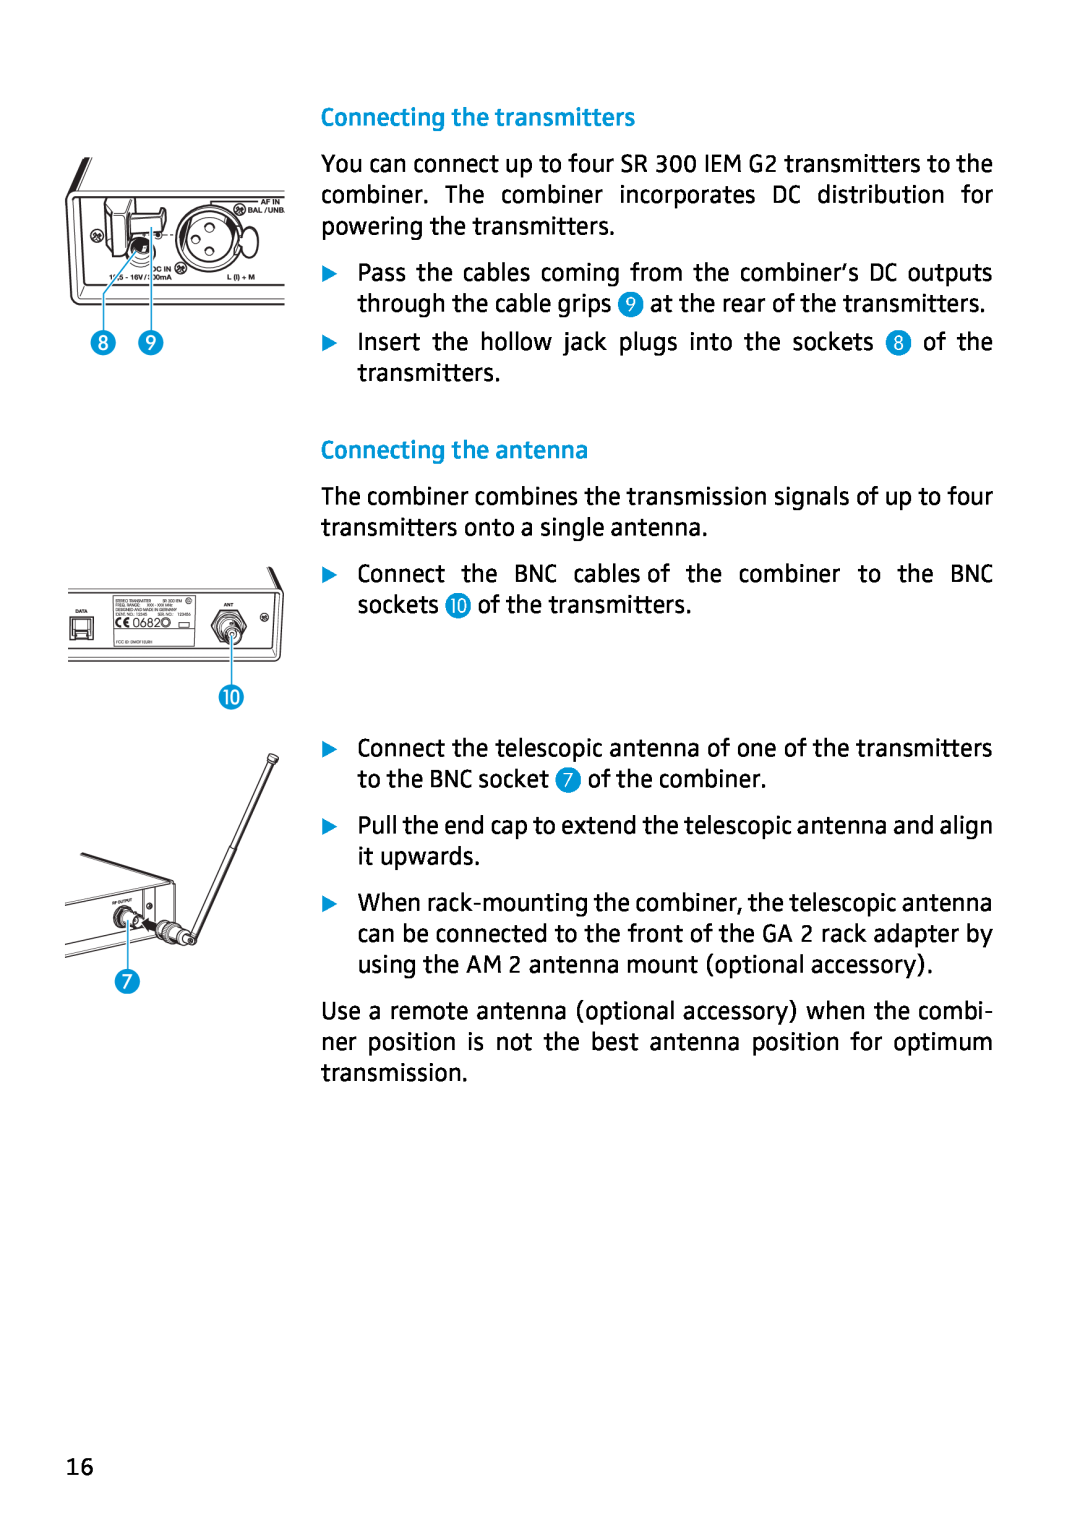 Sennheiser AC2 manual Connecting the transmitters, Connecting the antenna, through the cable grips 